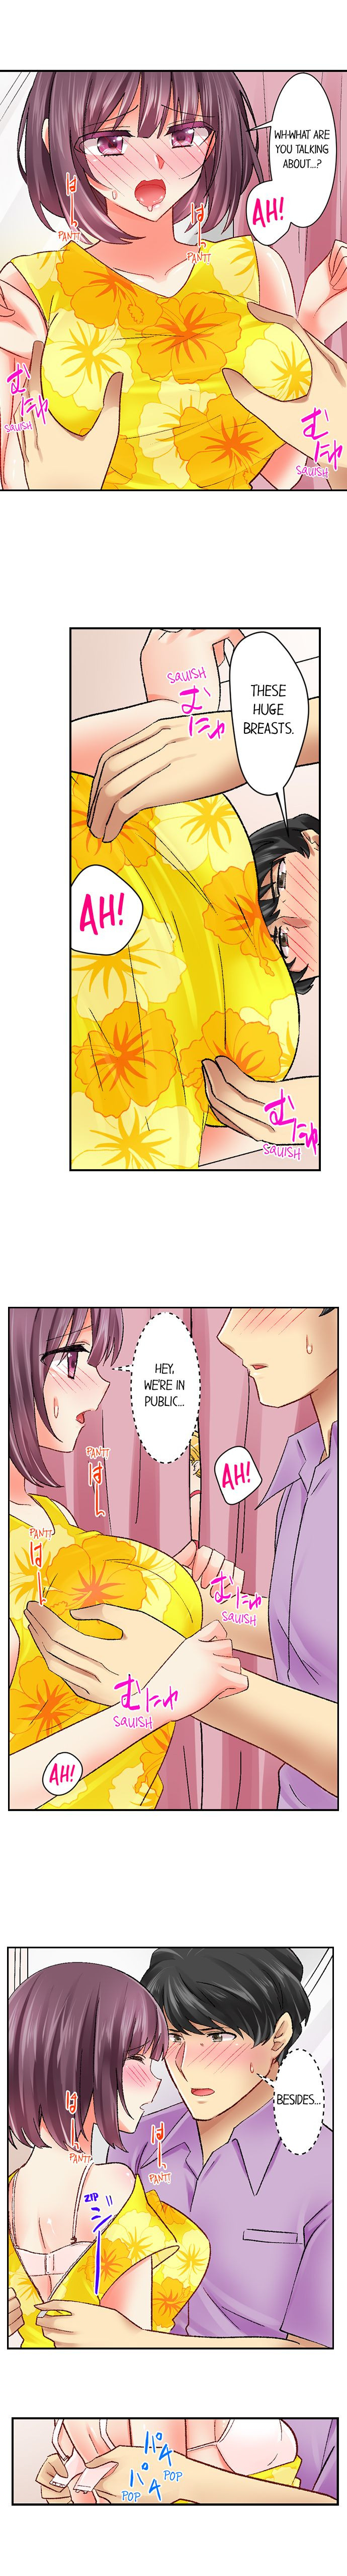 Our Kinky Newlywed Life - Chapter 50 Page 2